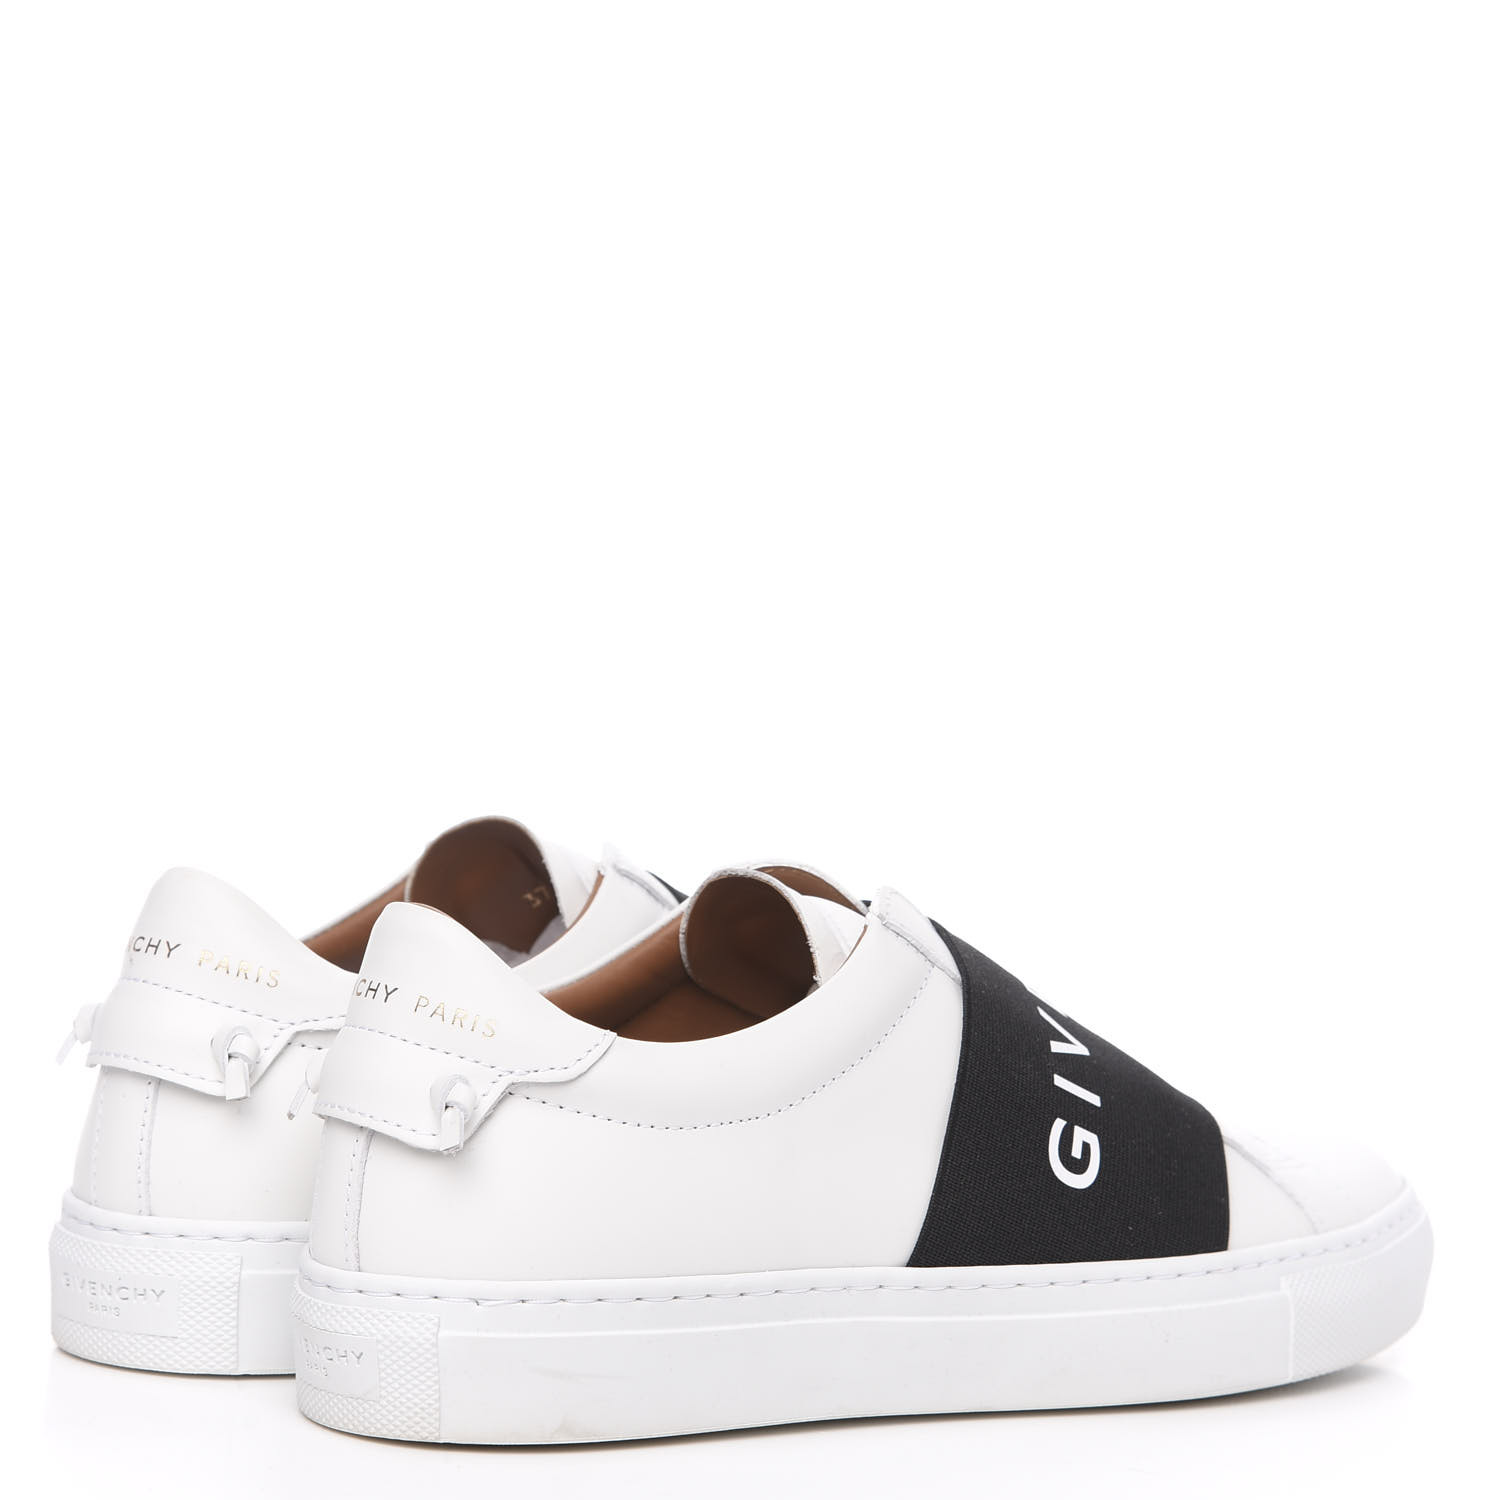 GIVENCHY Calfskin Mens Urban Knot Sneakers 37 White Black 588465 ...